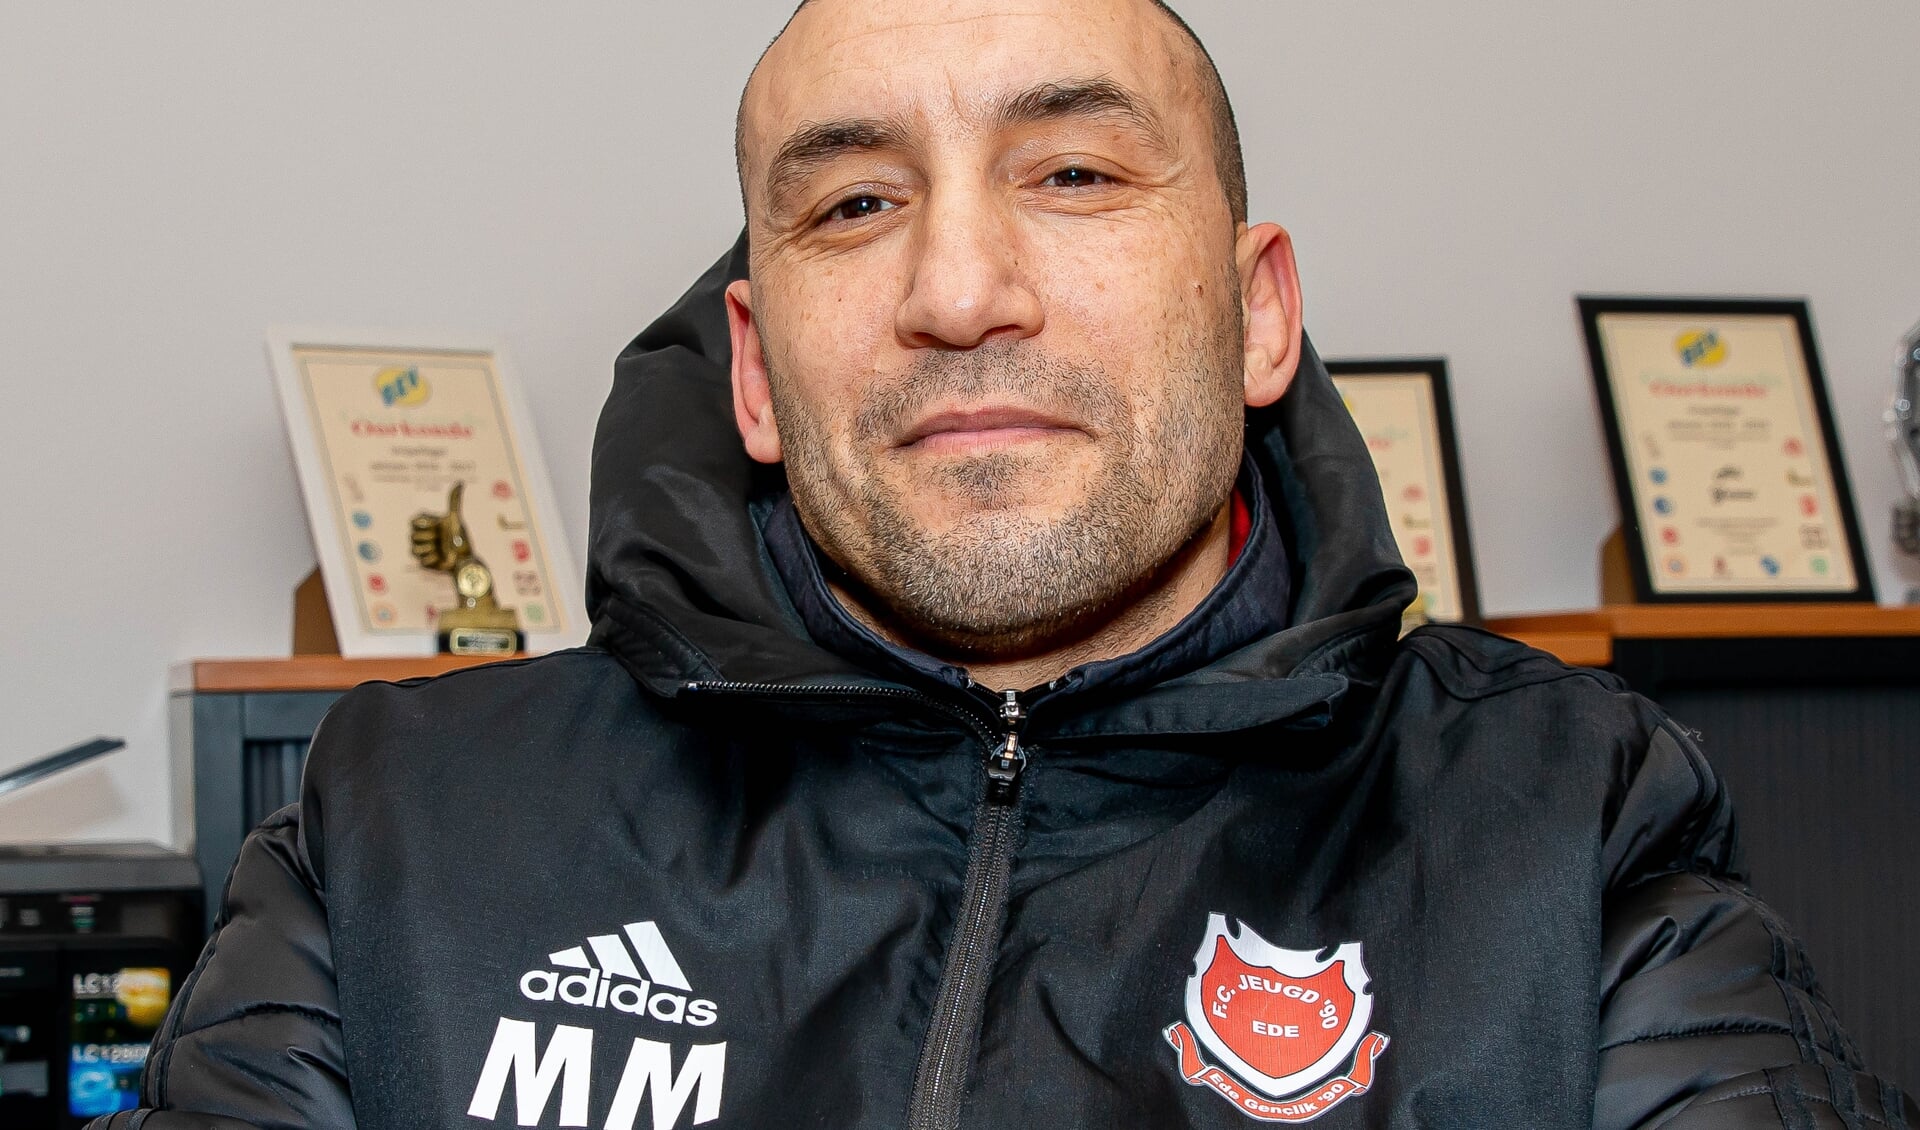 Mohammed Mouhouti